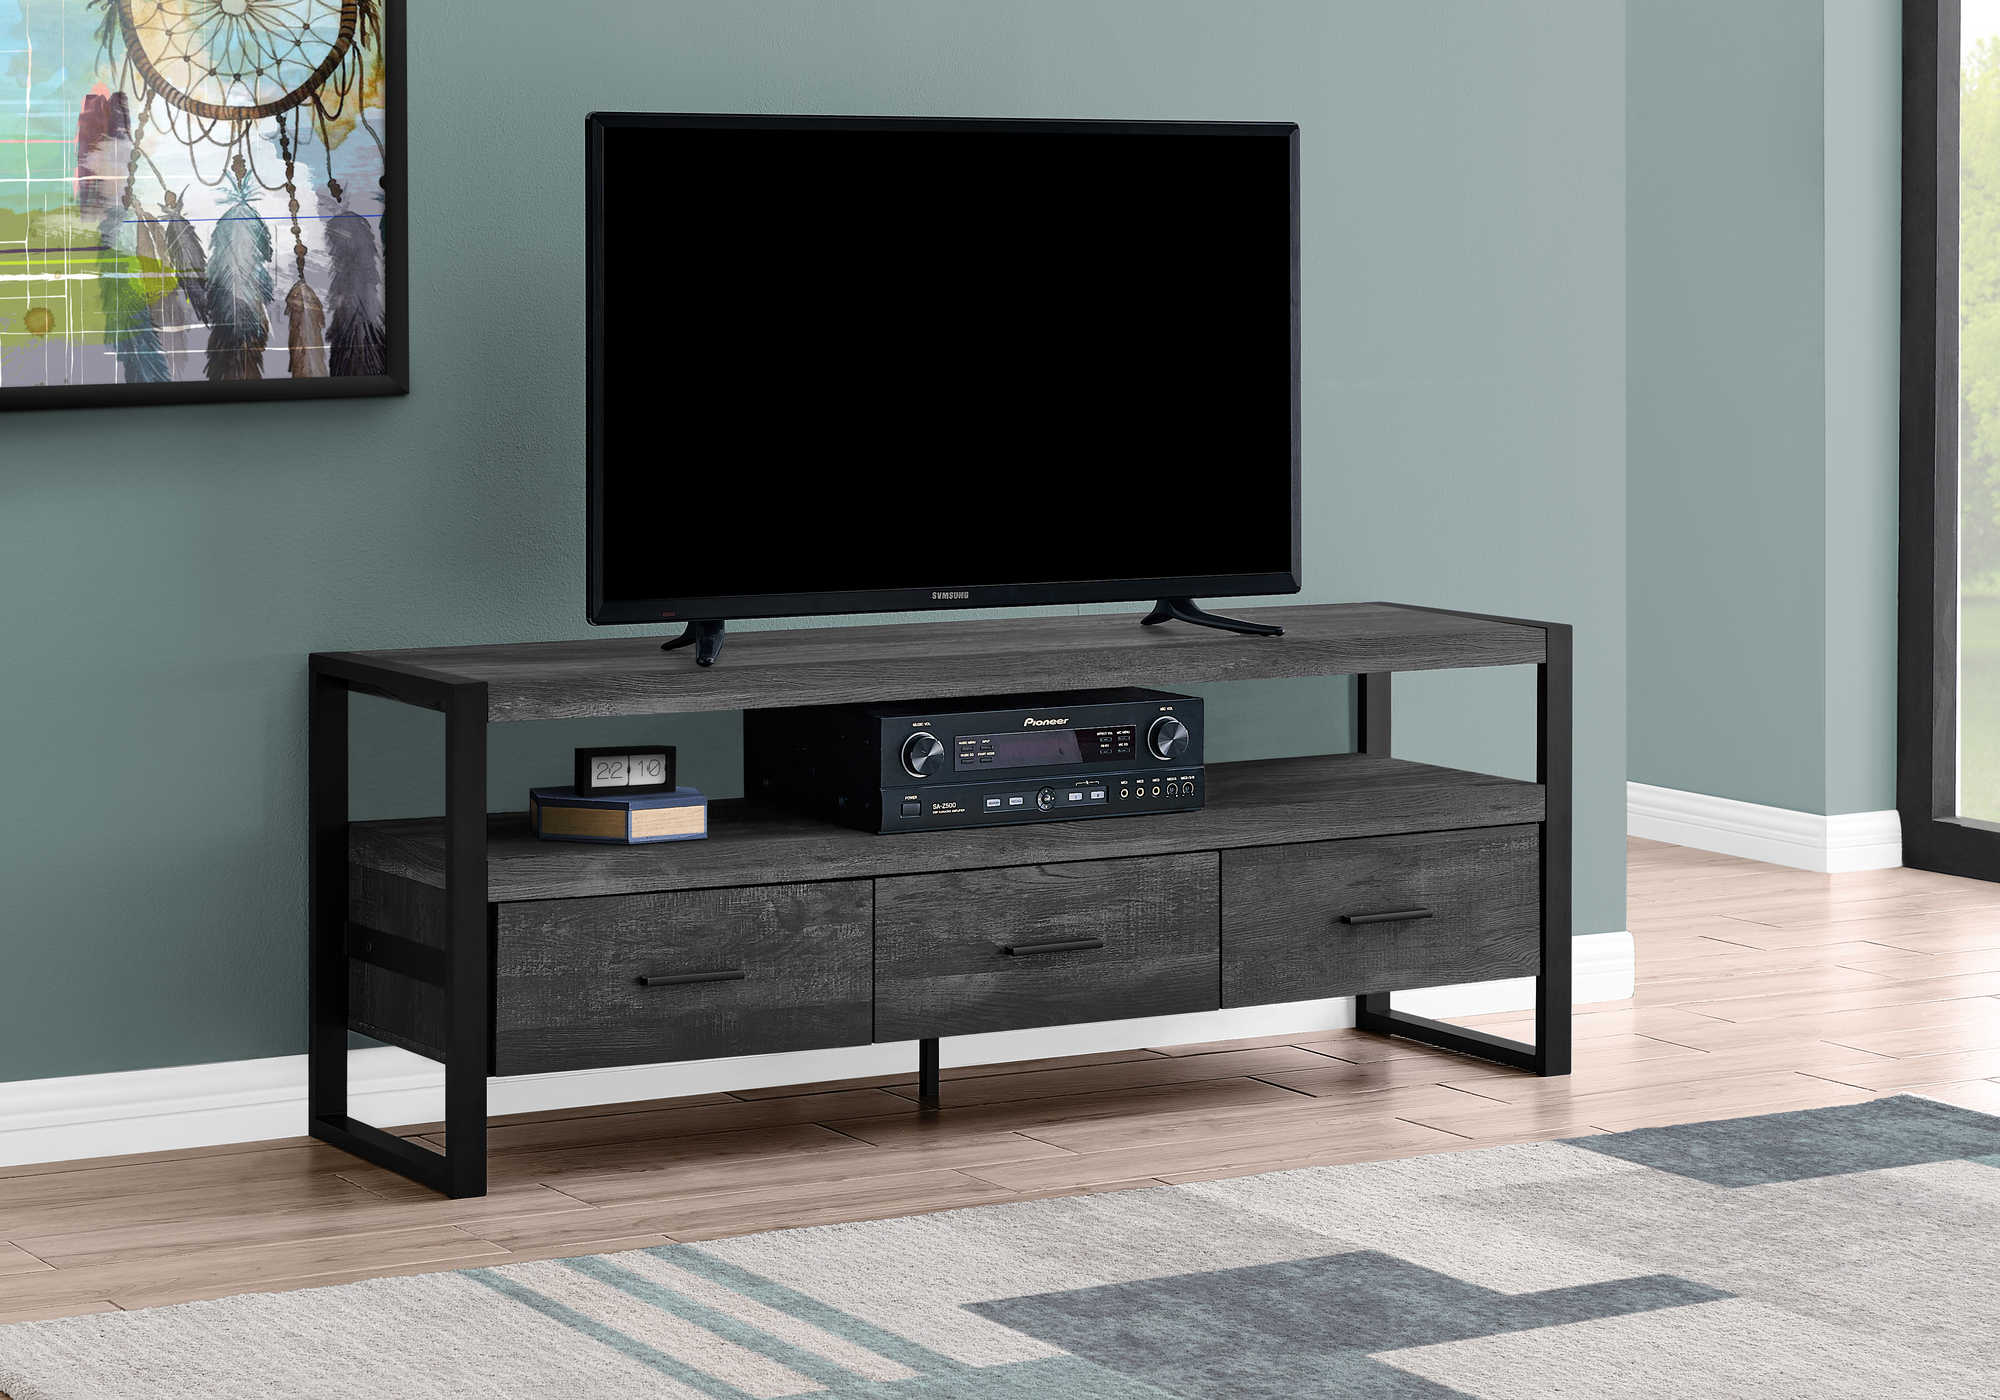 TV STAND - 60"L / BLACK RECLAIMED WOOD-LOOK / 3 DRAWERS